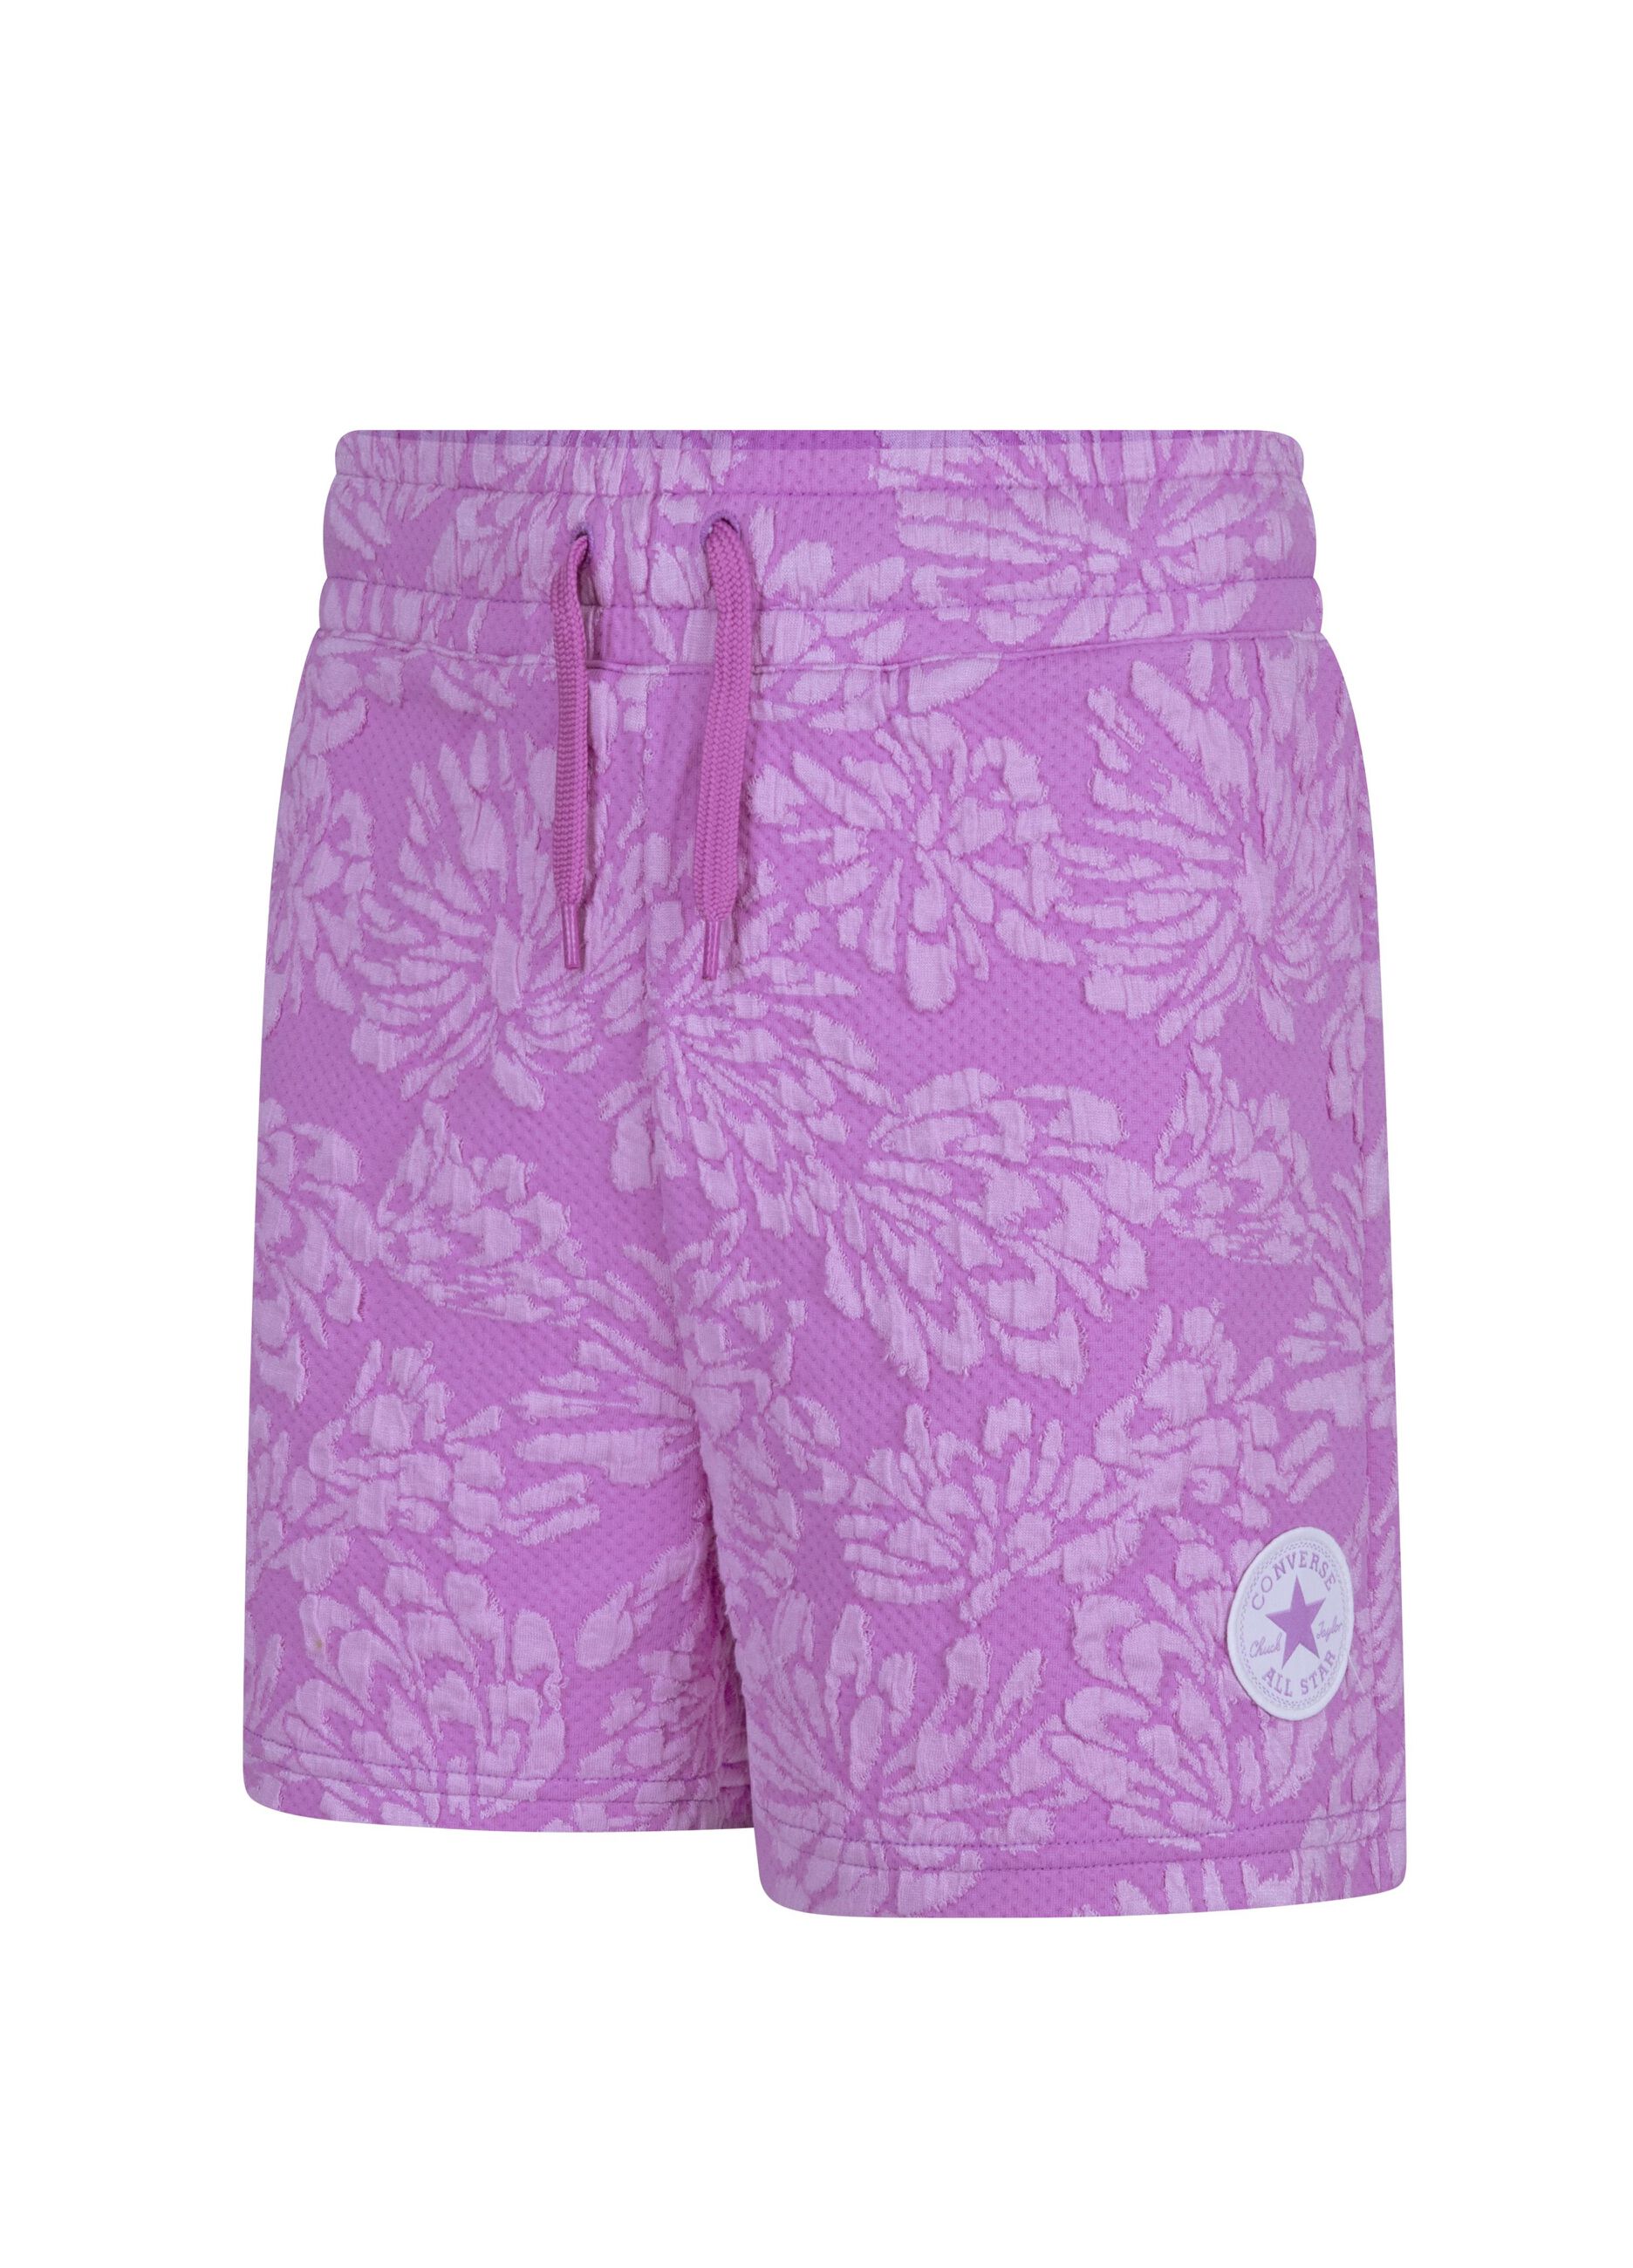 Jacquard shorts with Chuck Patch logo